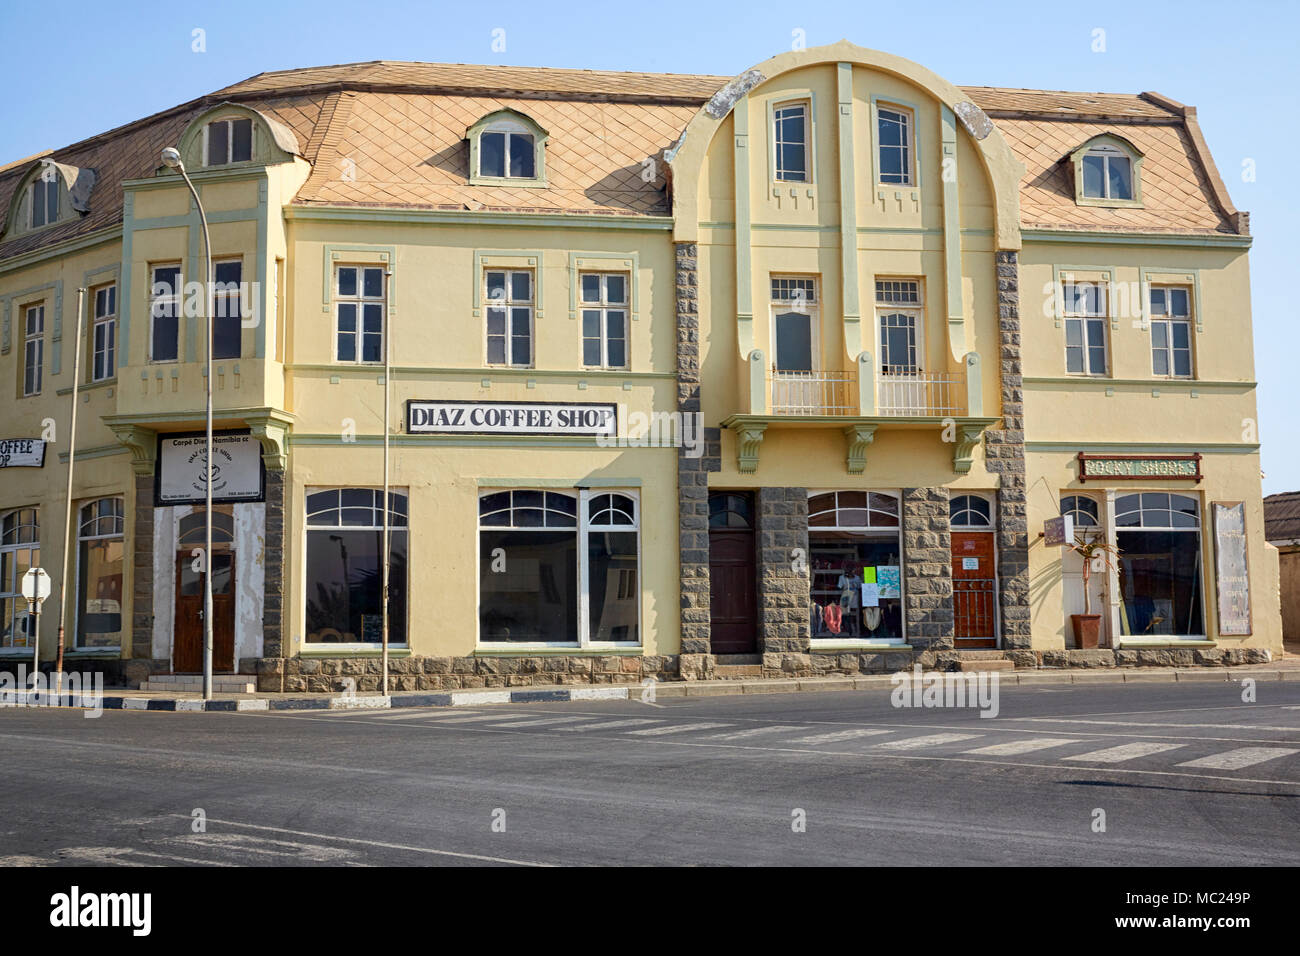 Diaz Coffee Shop located on a corner of Bismarck and Nachtigall Streets in Luderitz, Namibia, Africa Stock Photo